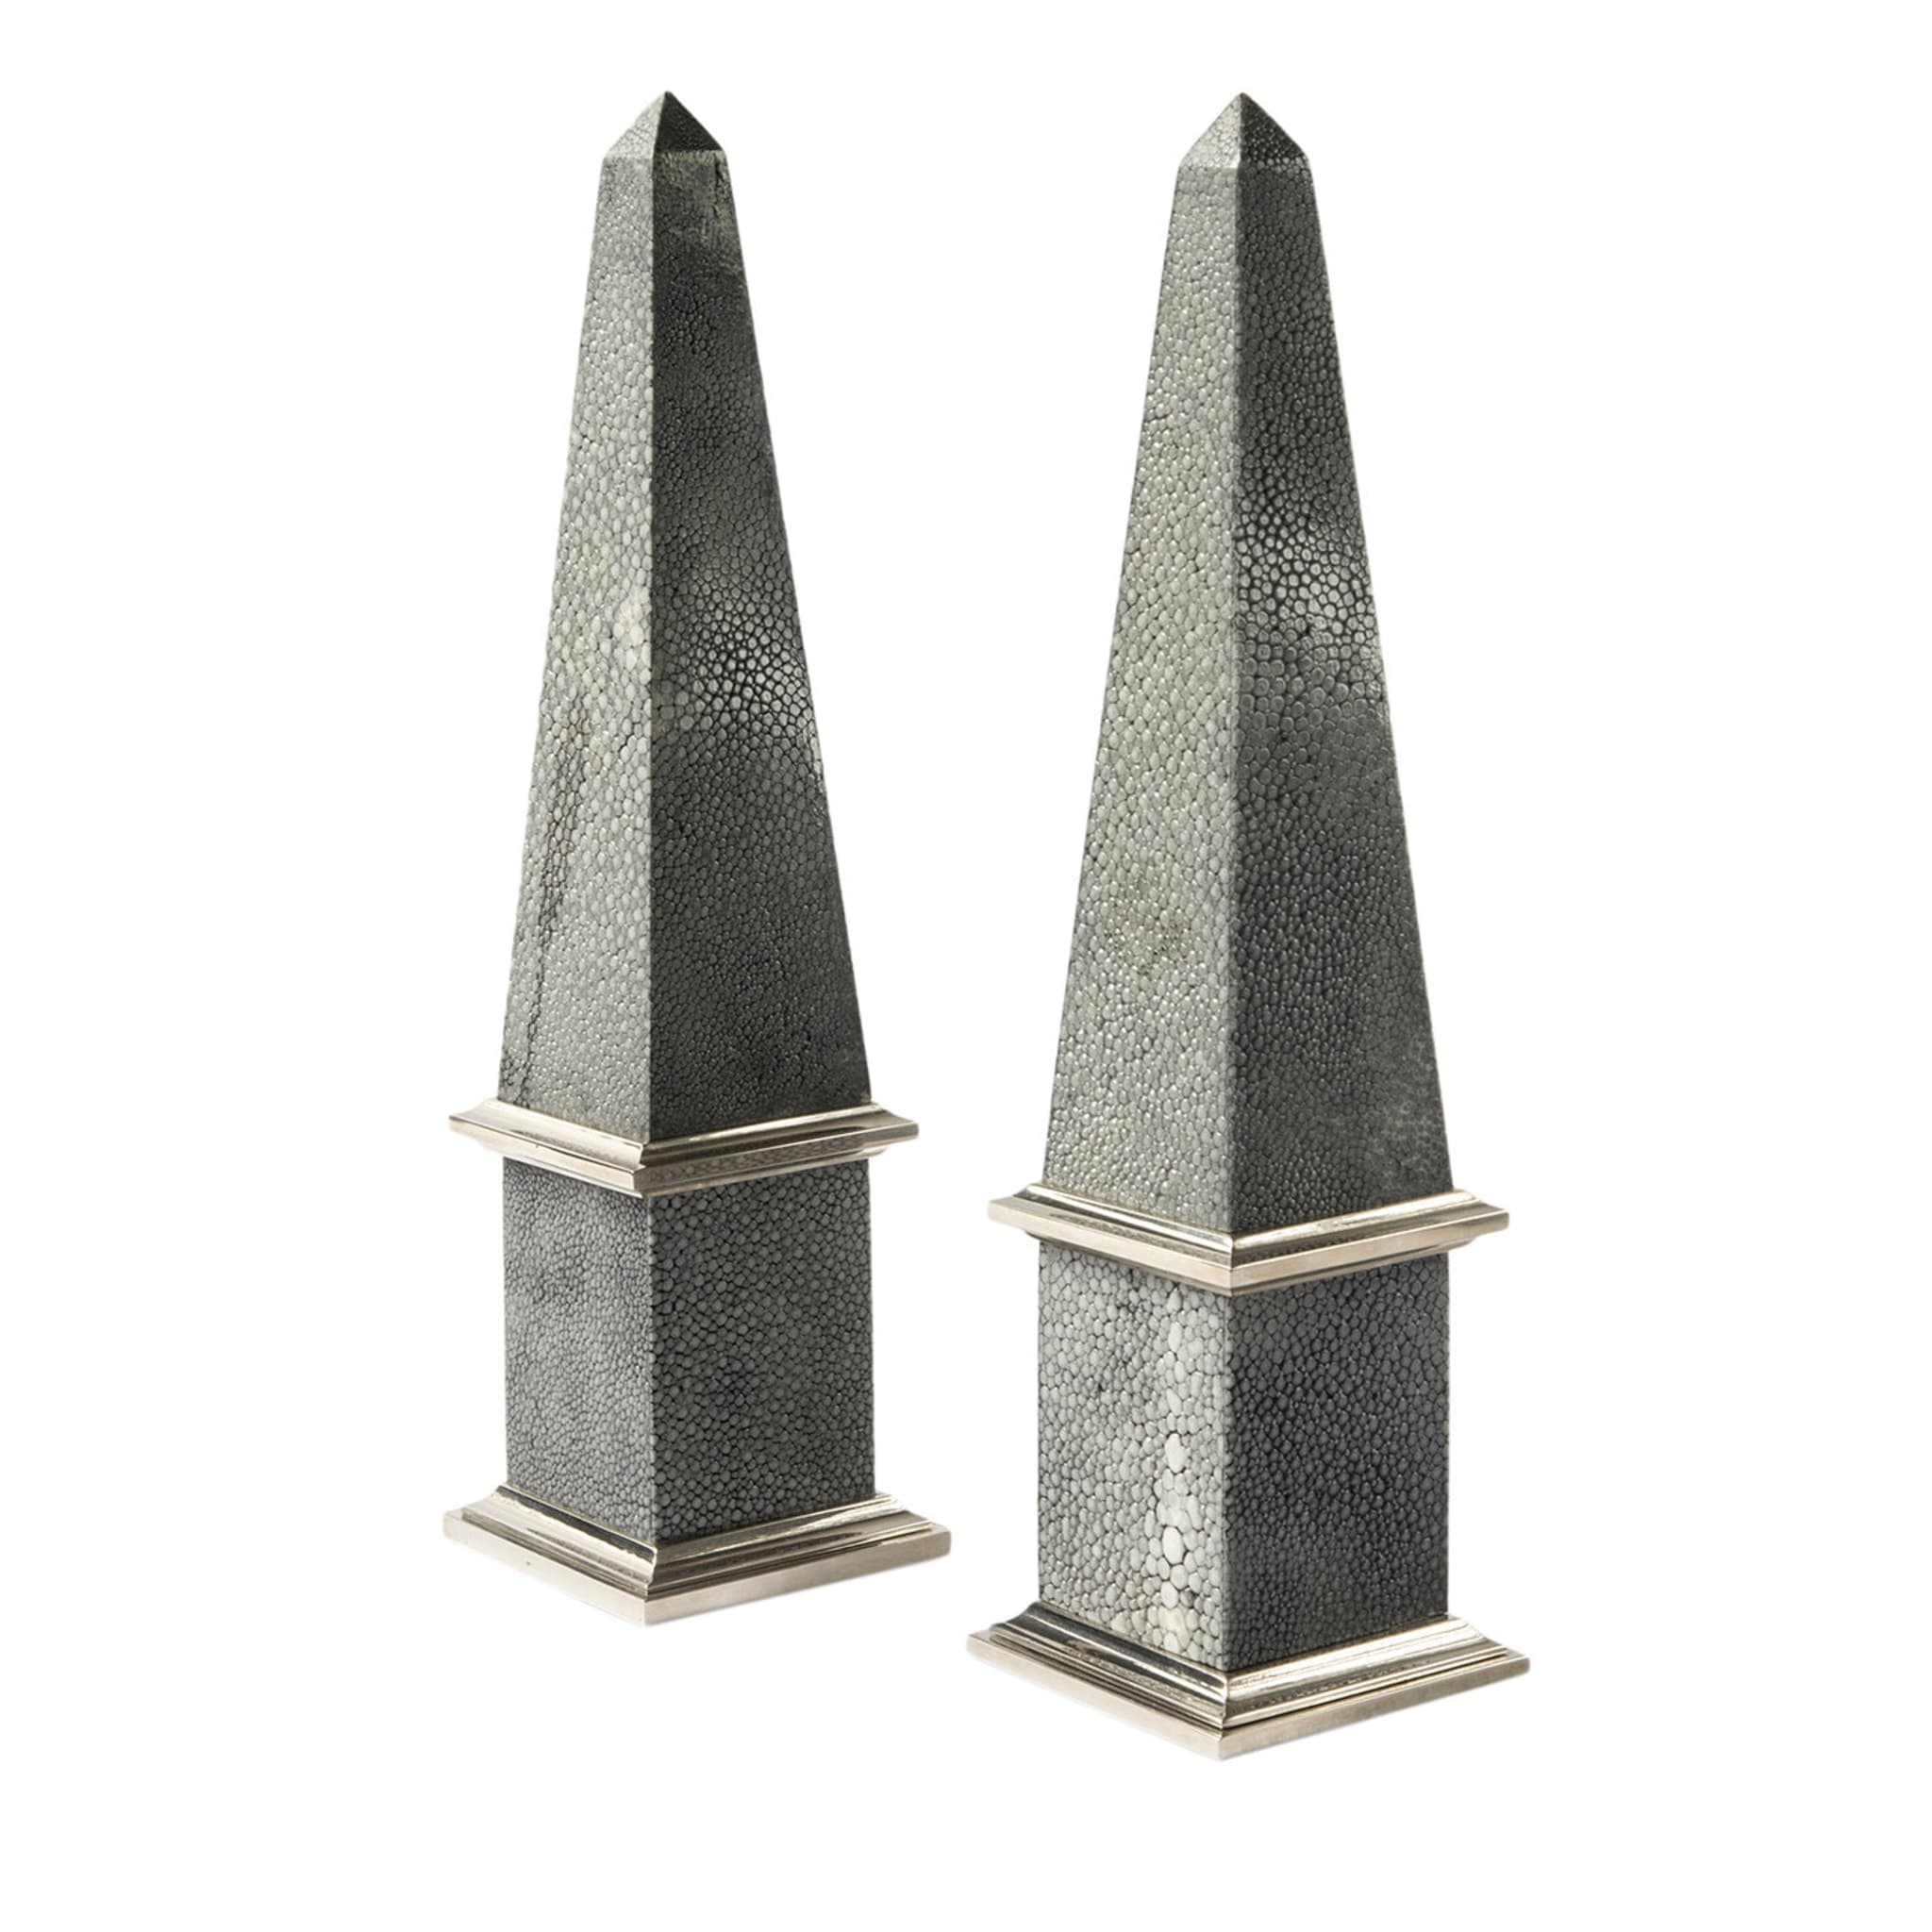 Galucharme Luxor Set of 2 Obelisk Sculptures by Nino Basso - Main view